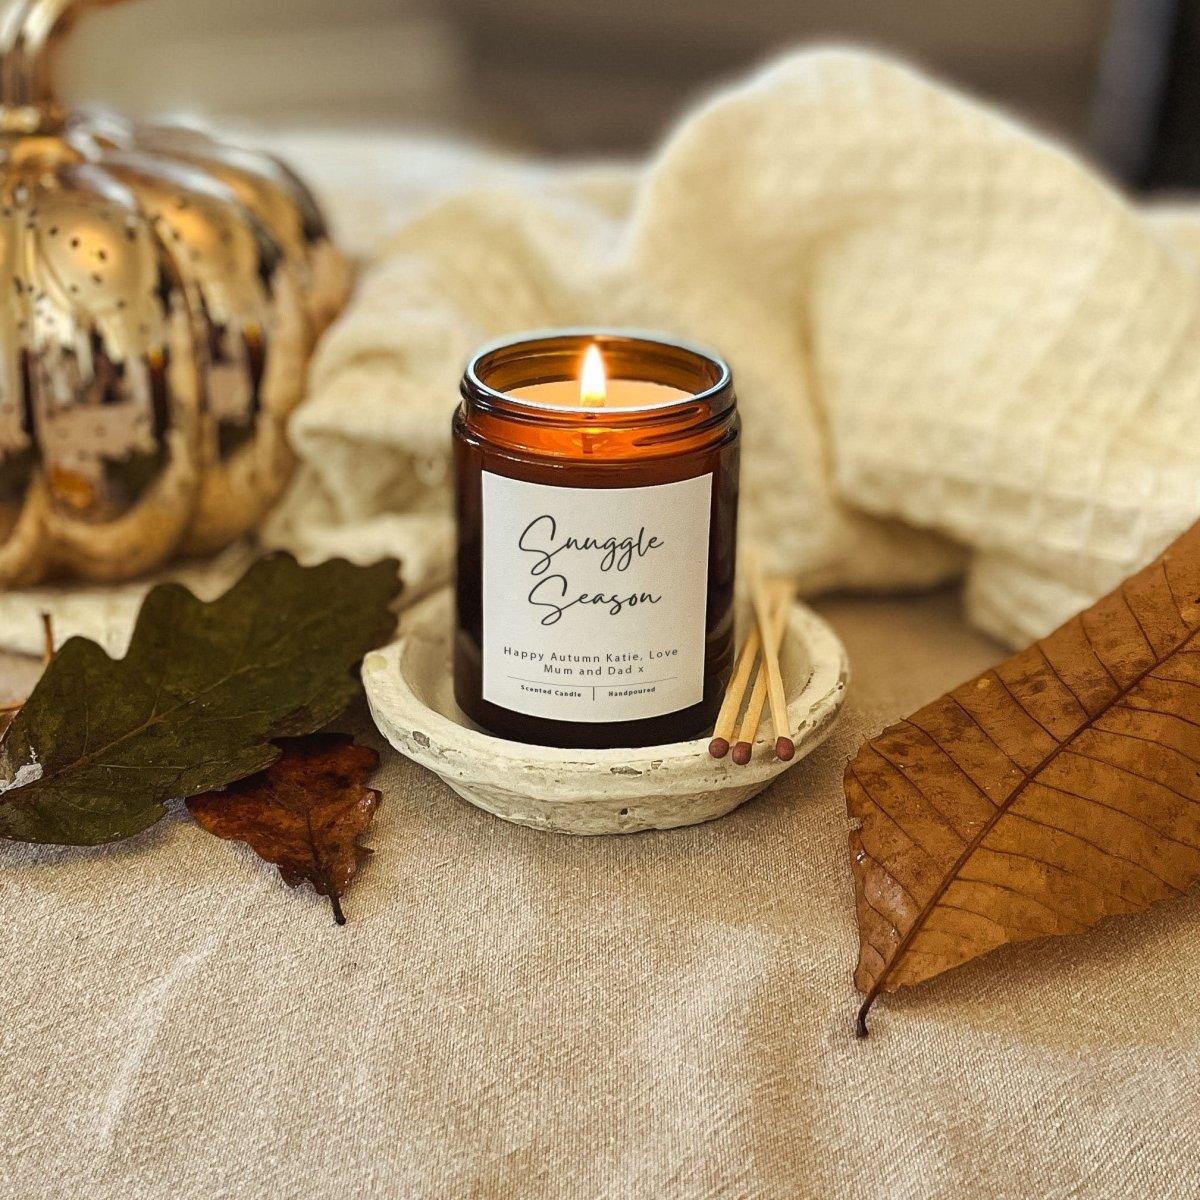 Personalised Snuggle Season Candle, Autumn Candle, Fall Season Candle, Autumn Vibes, Vegan Candle, Brown Jar Candle, Scented Candle, Fall - Amy Lucy